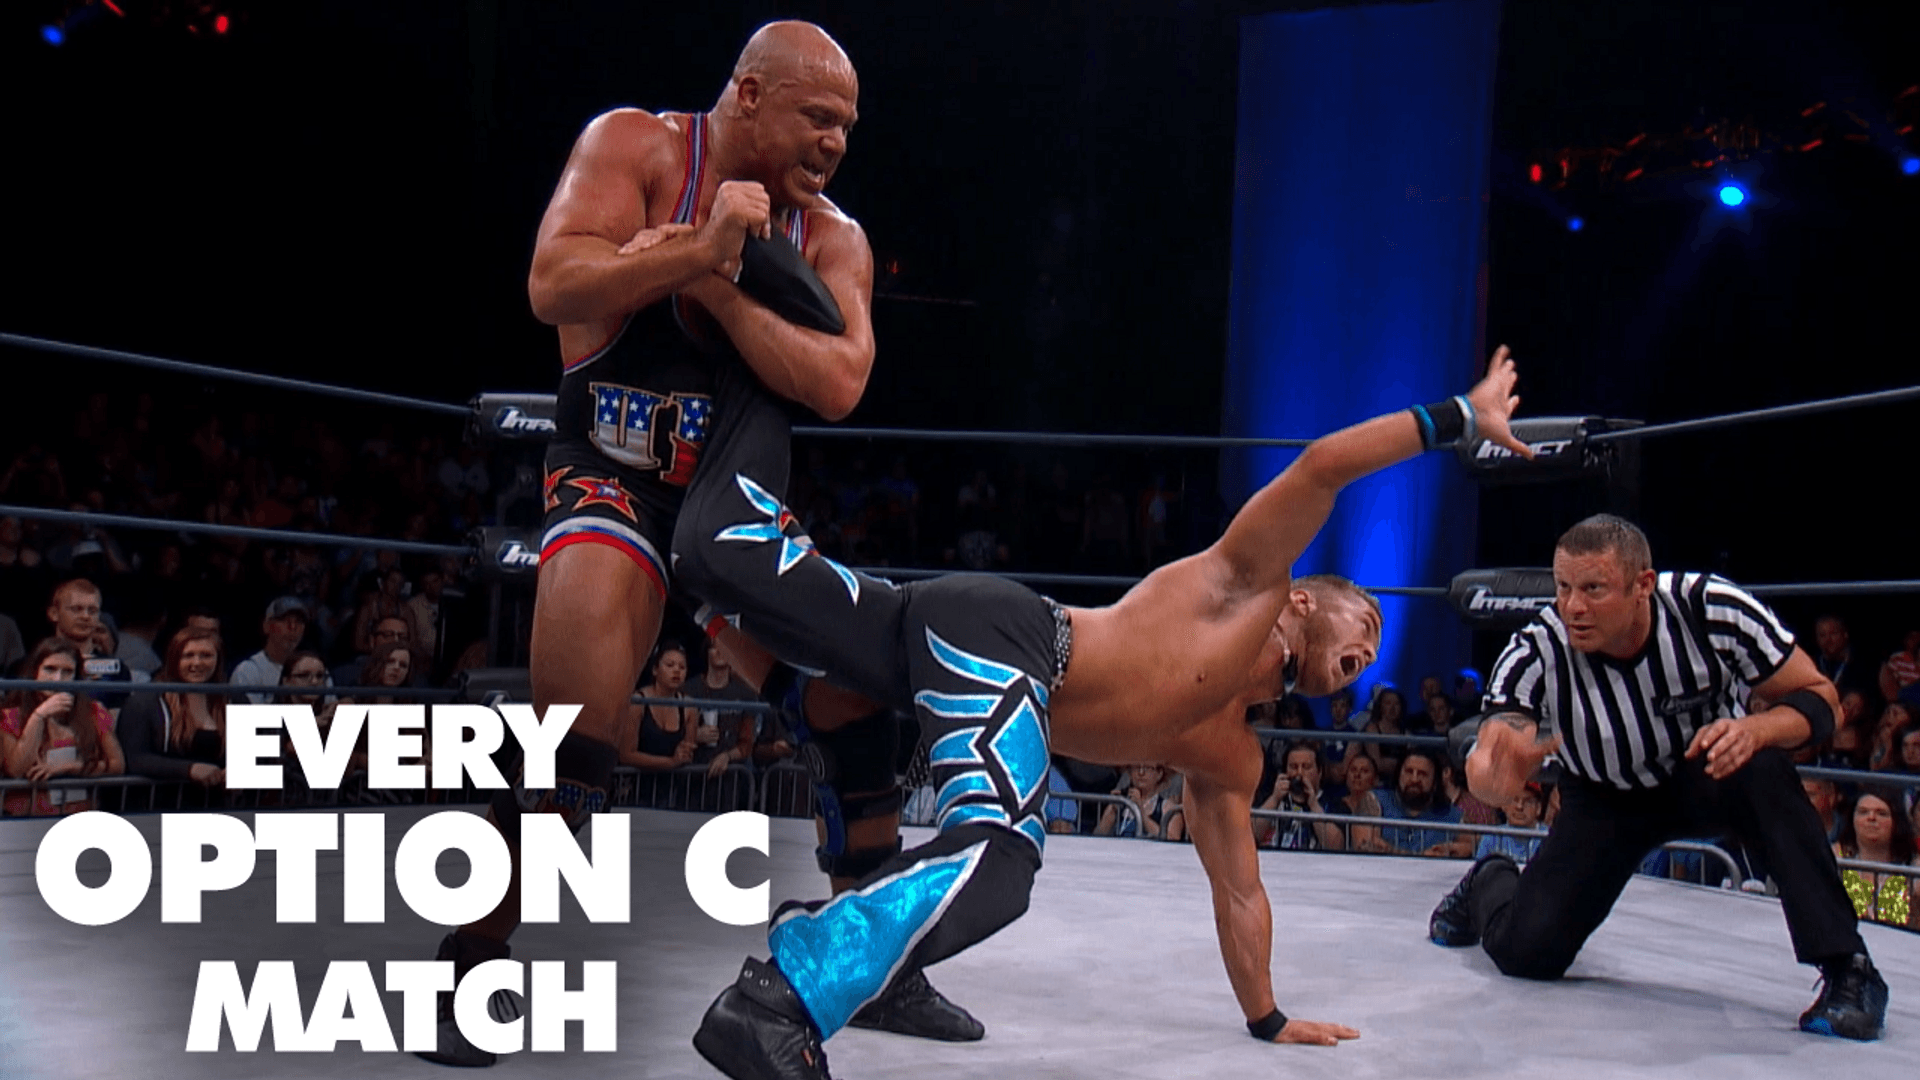 Watch Every Option C Match Ever FREE on IMPACT Plus